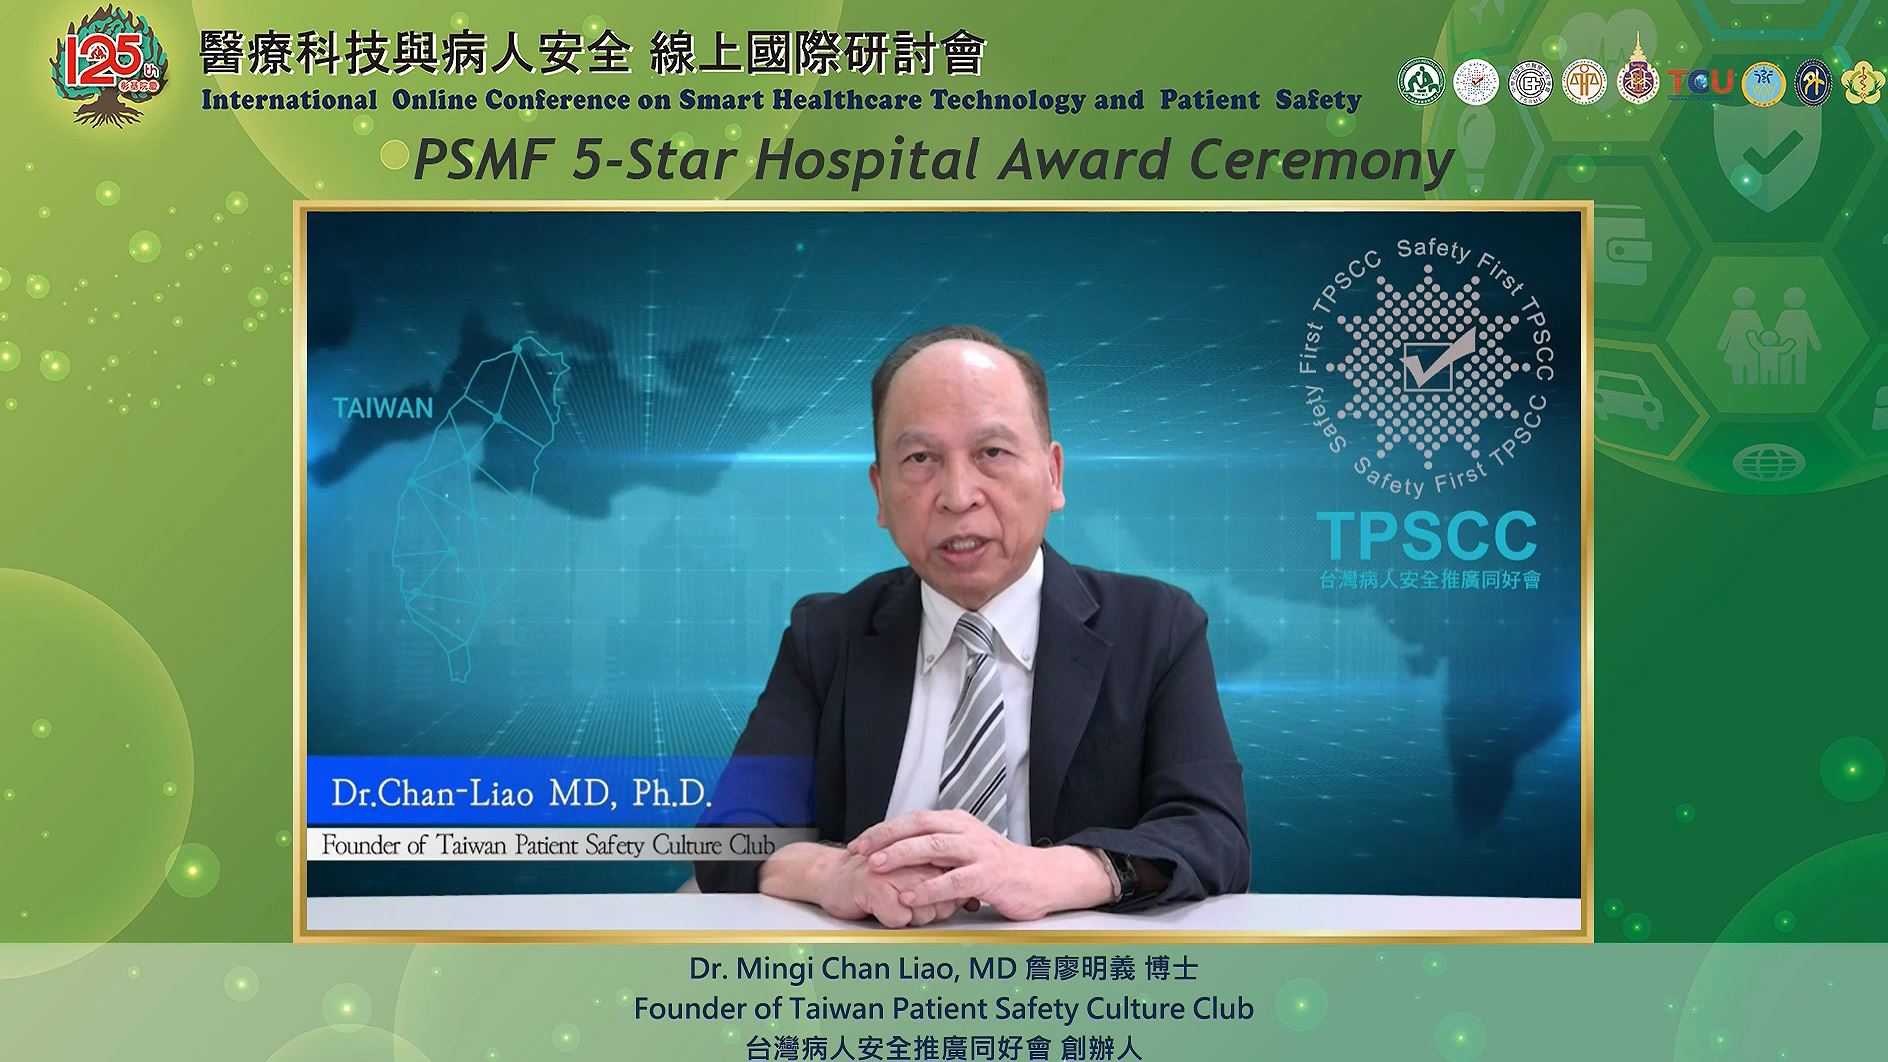 Dr. Mingi Chan Liao, Founder of Taiwan Patient Safety Culture Club As the Representstive for Awarding